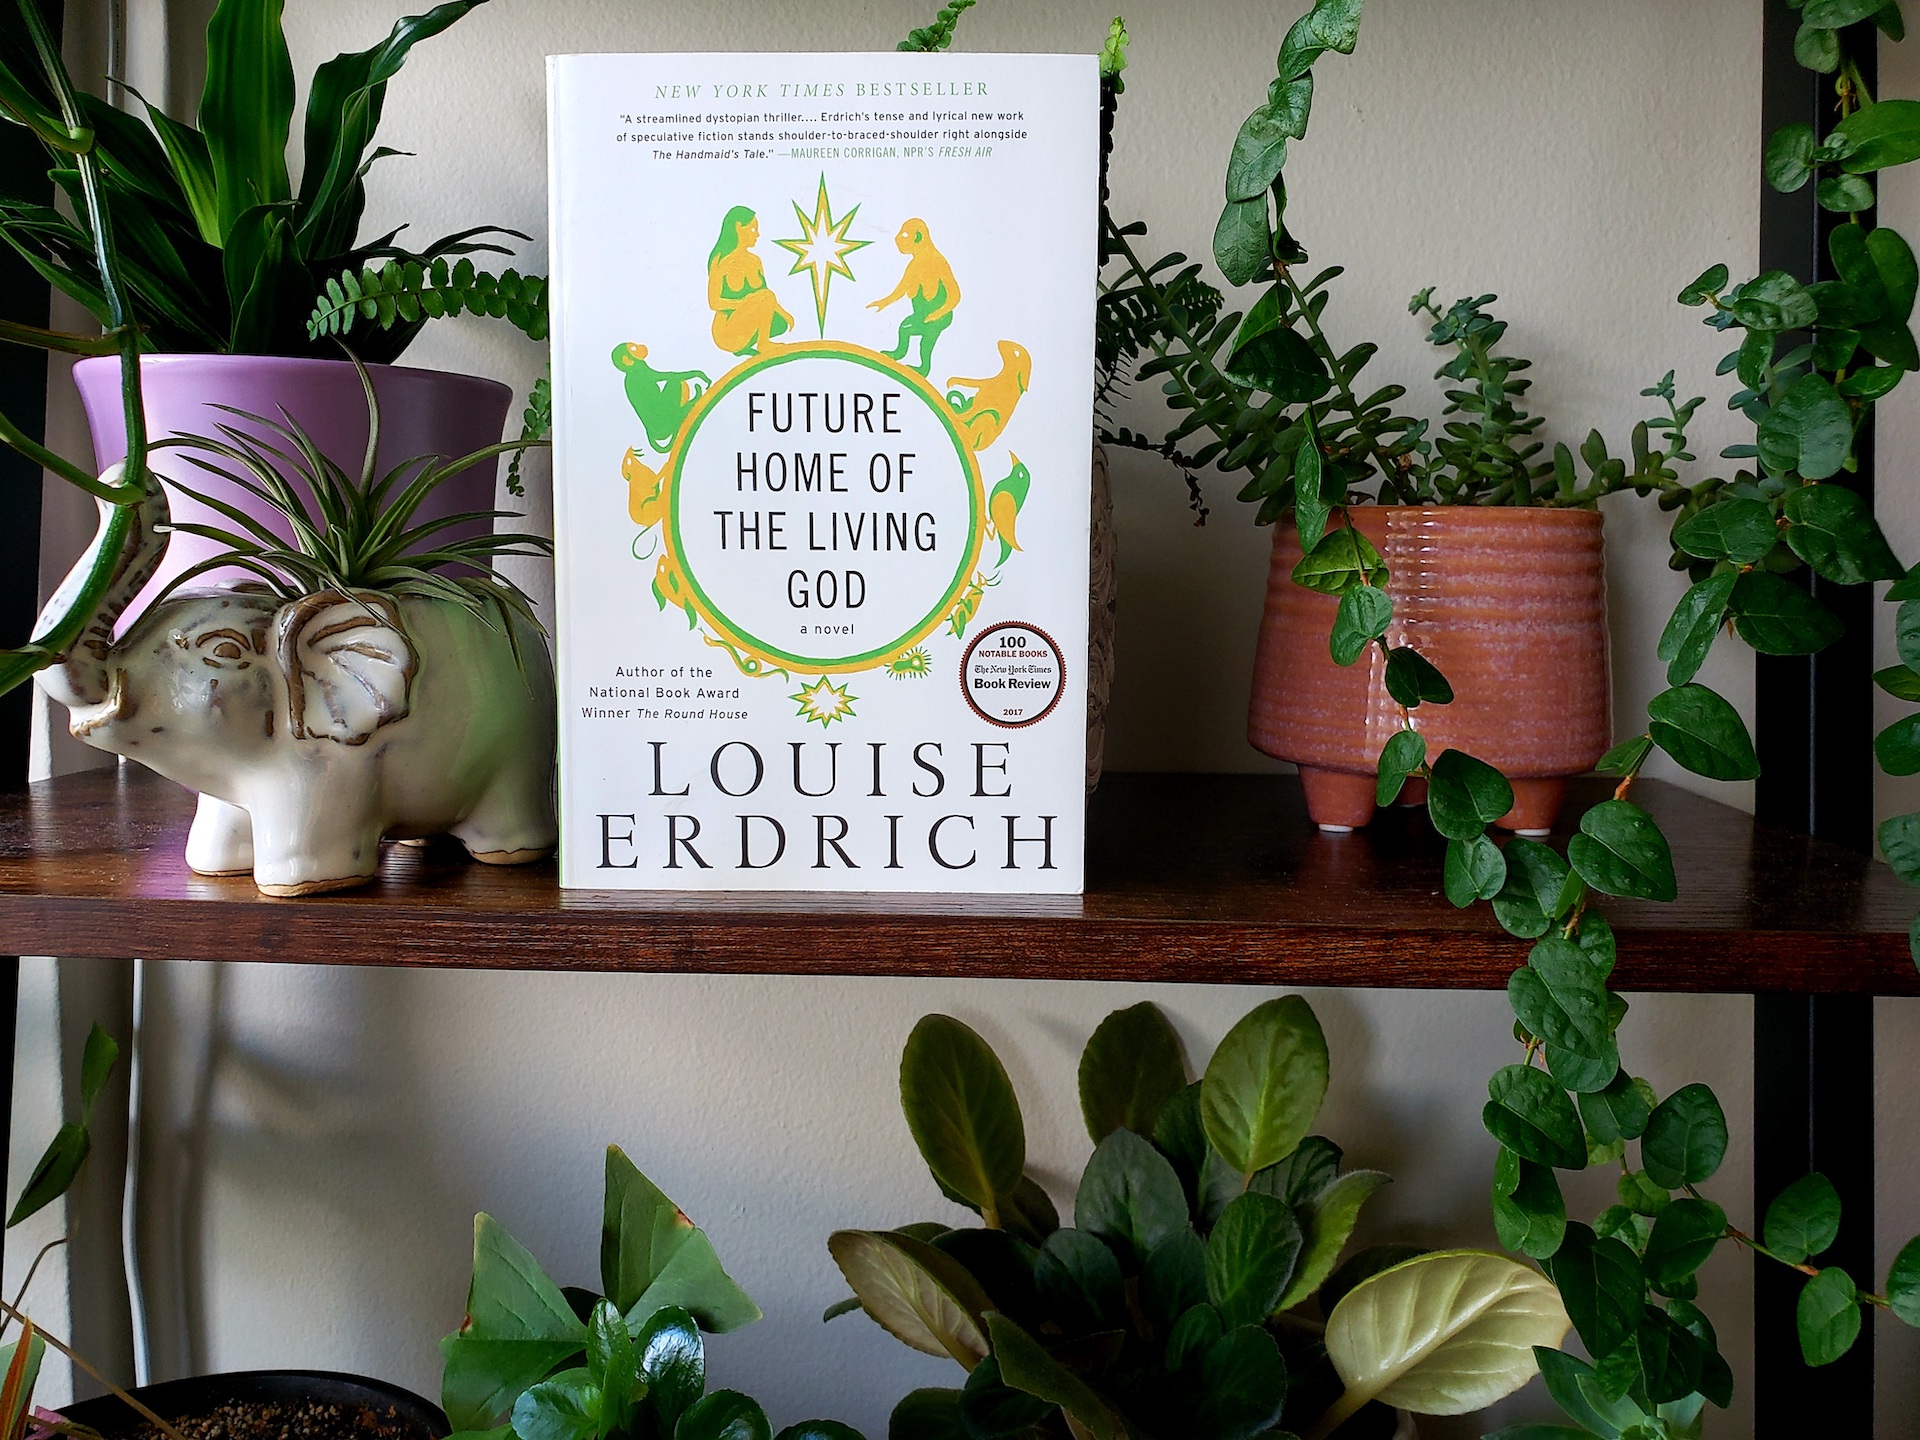 76: Future Home of the Living God by Louise Erdrich